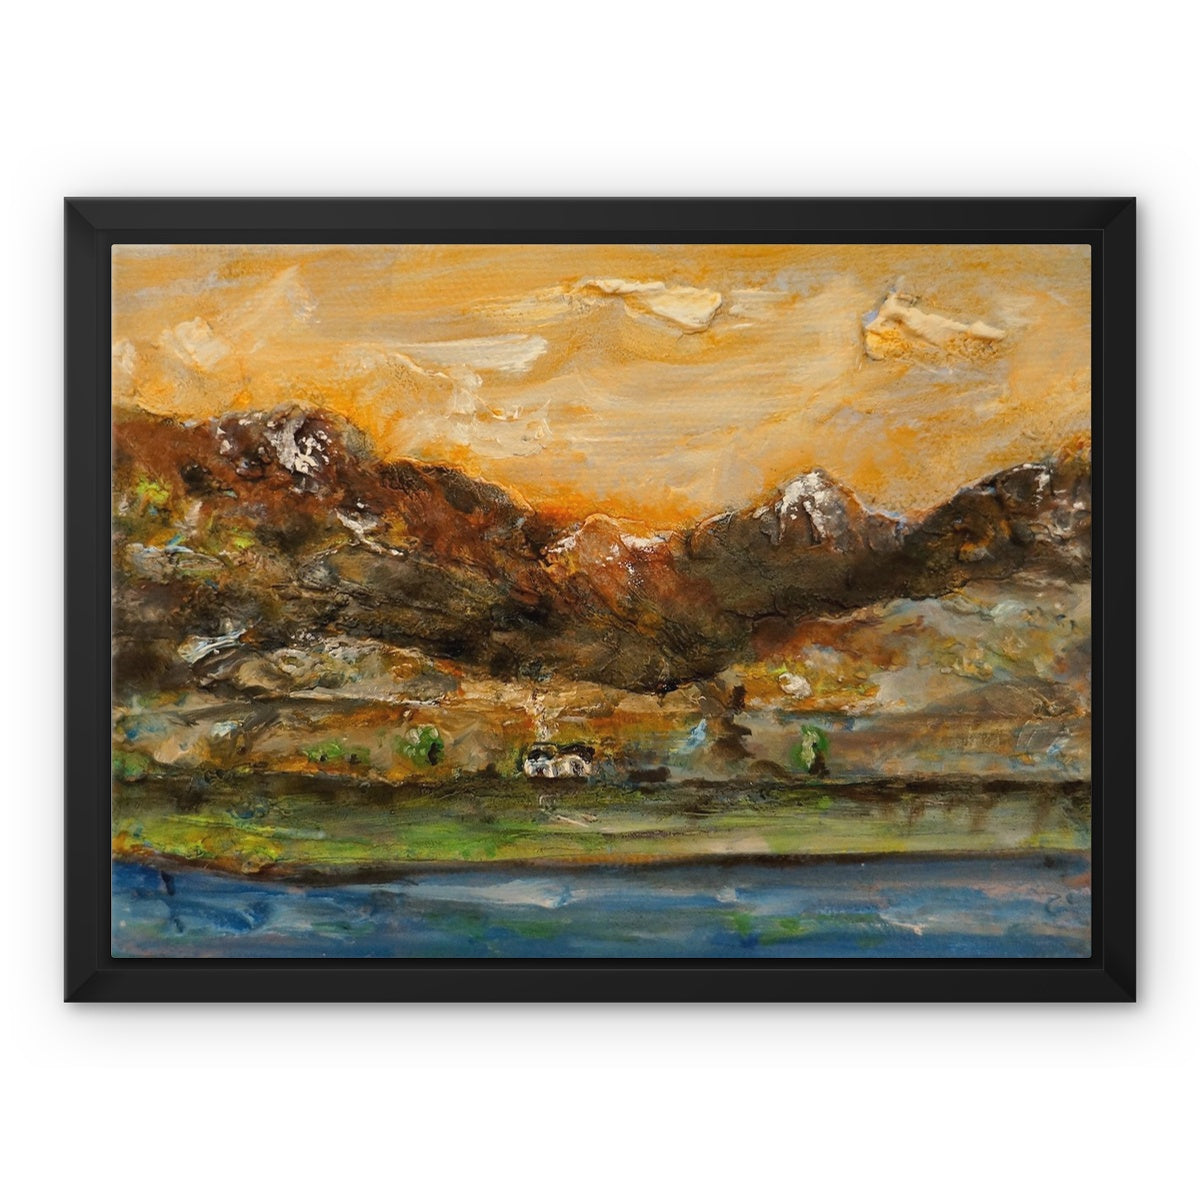 A Glencoe Cottage Painting | Framed Canvas From Scotland-Floating Framed Canvas Prints-Glencoe Art Gallery-16"x12"-Black Frame-Paintings, Prints, Homeware, Art Gifts From Scotland By Scottish Artist Kevin Hunter